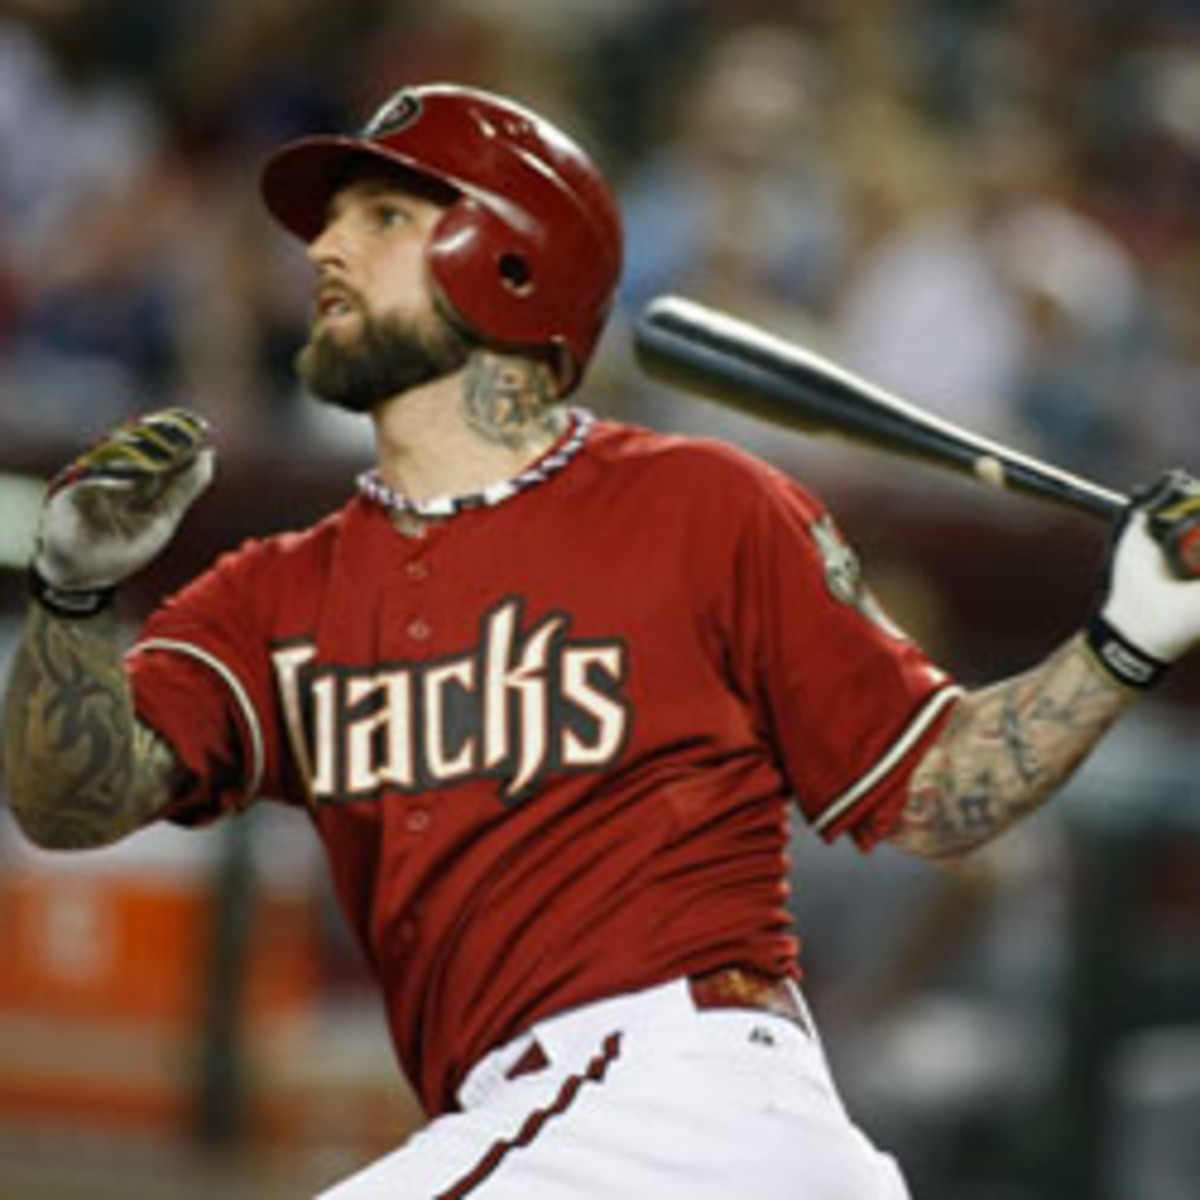 <> at Chase Field on July 4, 2012 in Phoenix, Arizona.